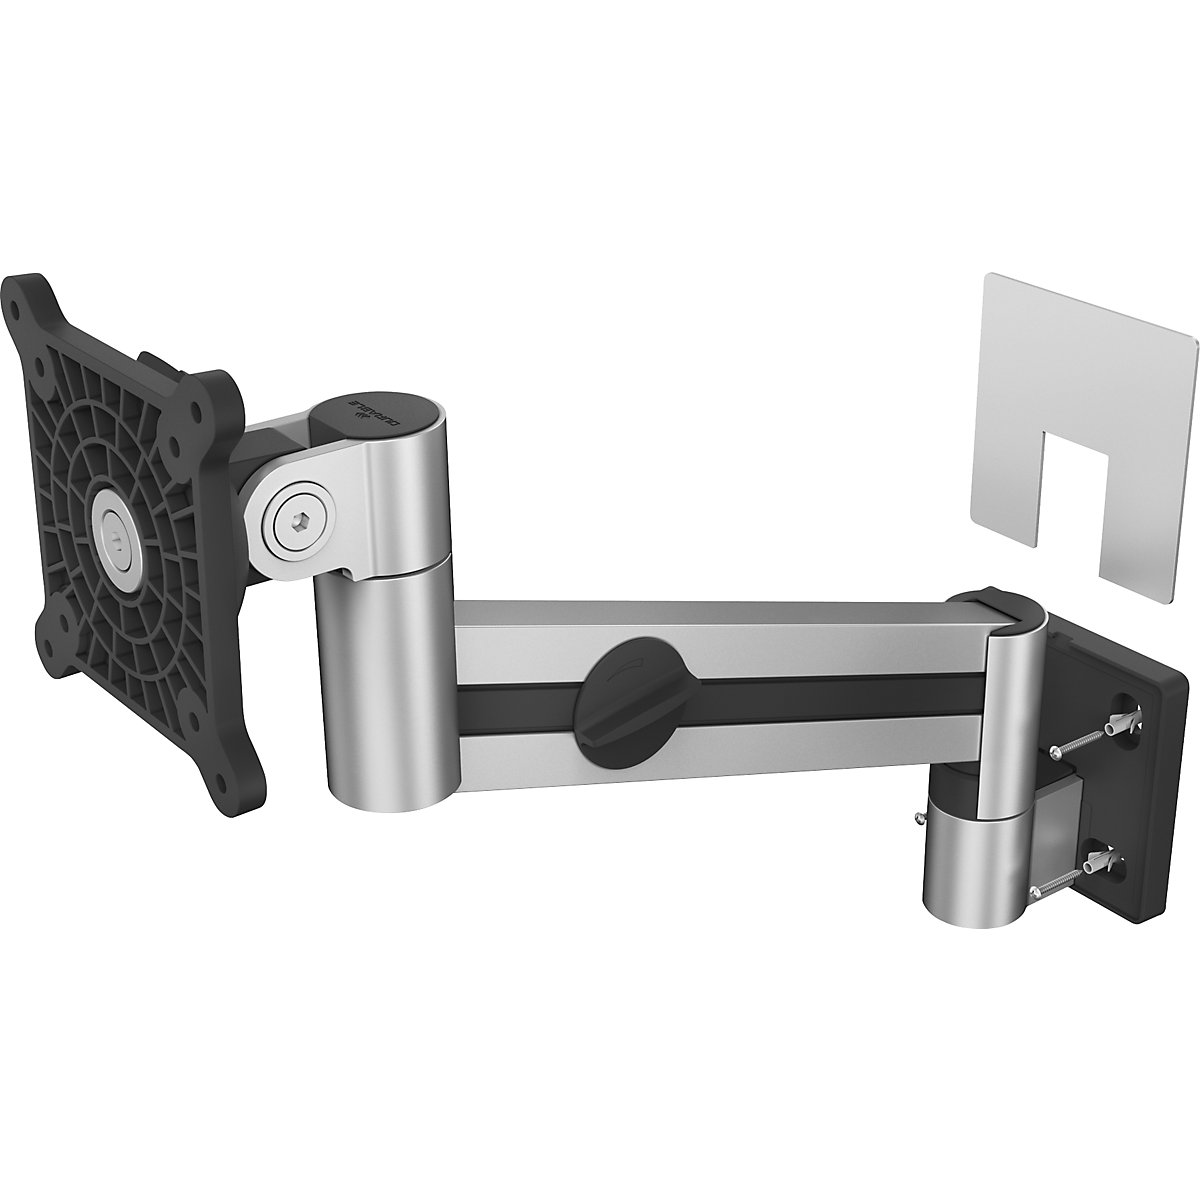 Monitor wall mounting bracket with arm for 1 monitor - DURABLE